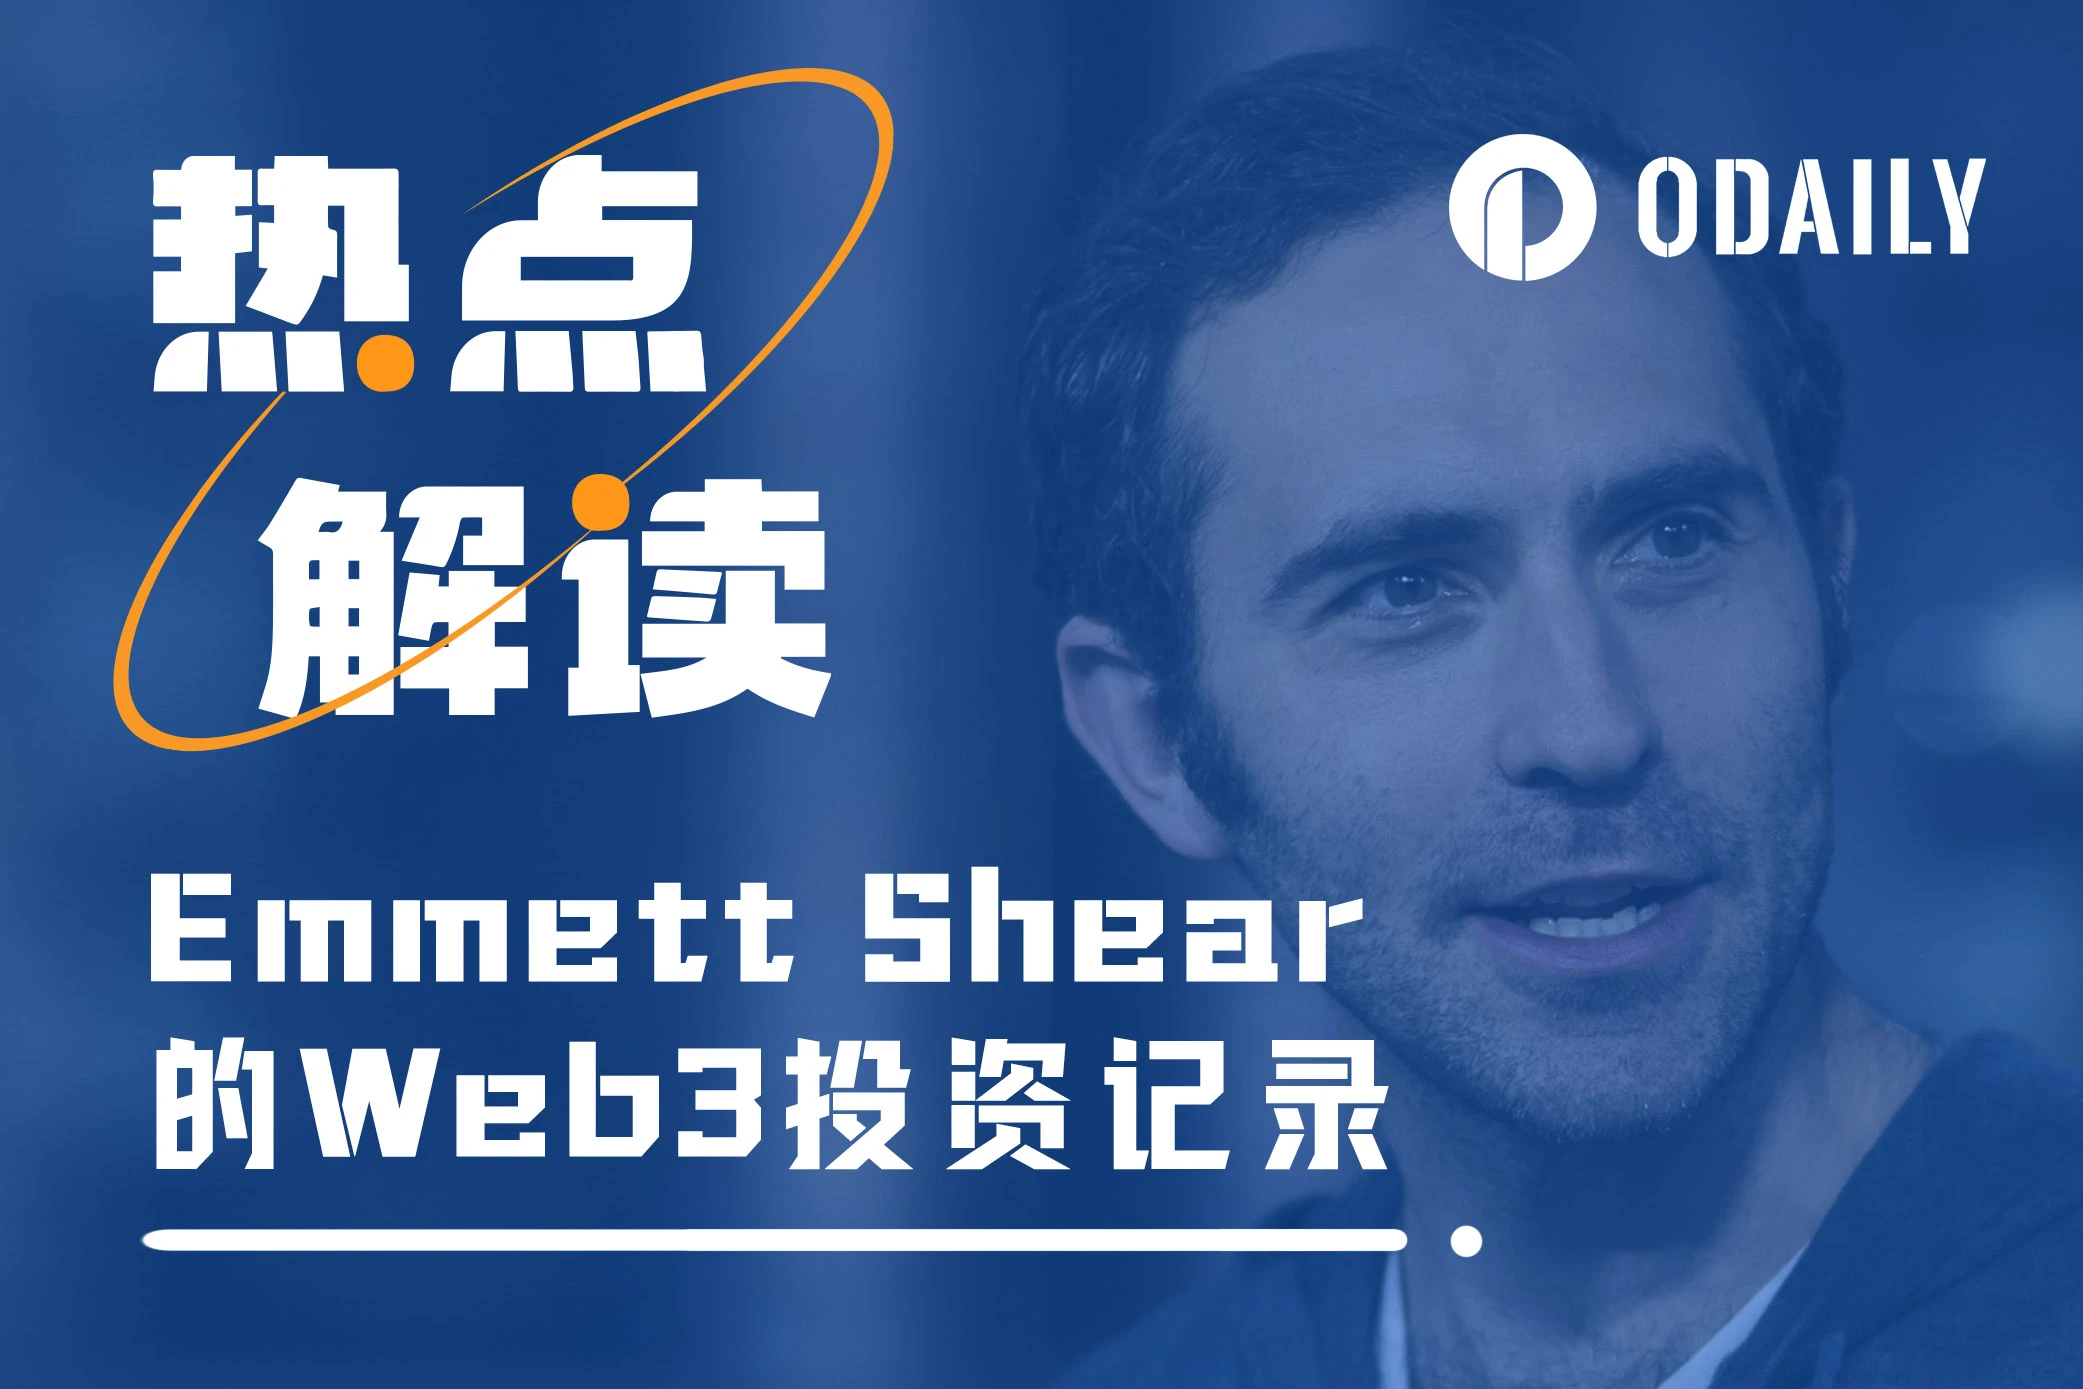 OpenAI’s new CEO is finalized. Which Web3 projects has Emmett Shear invested in?